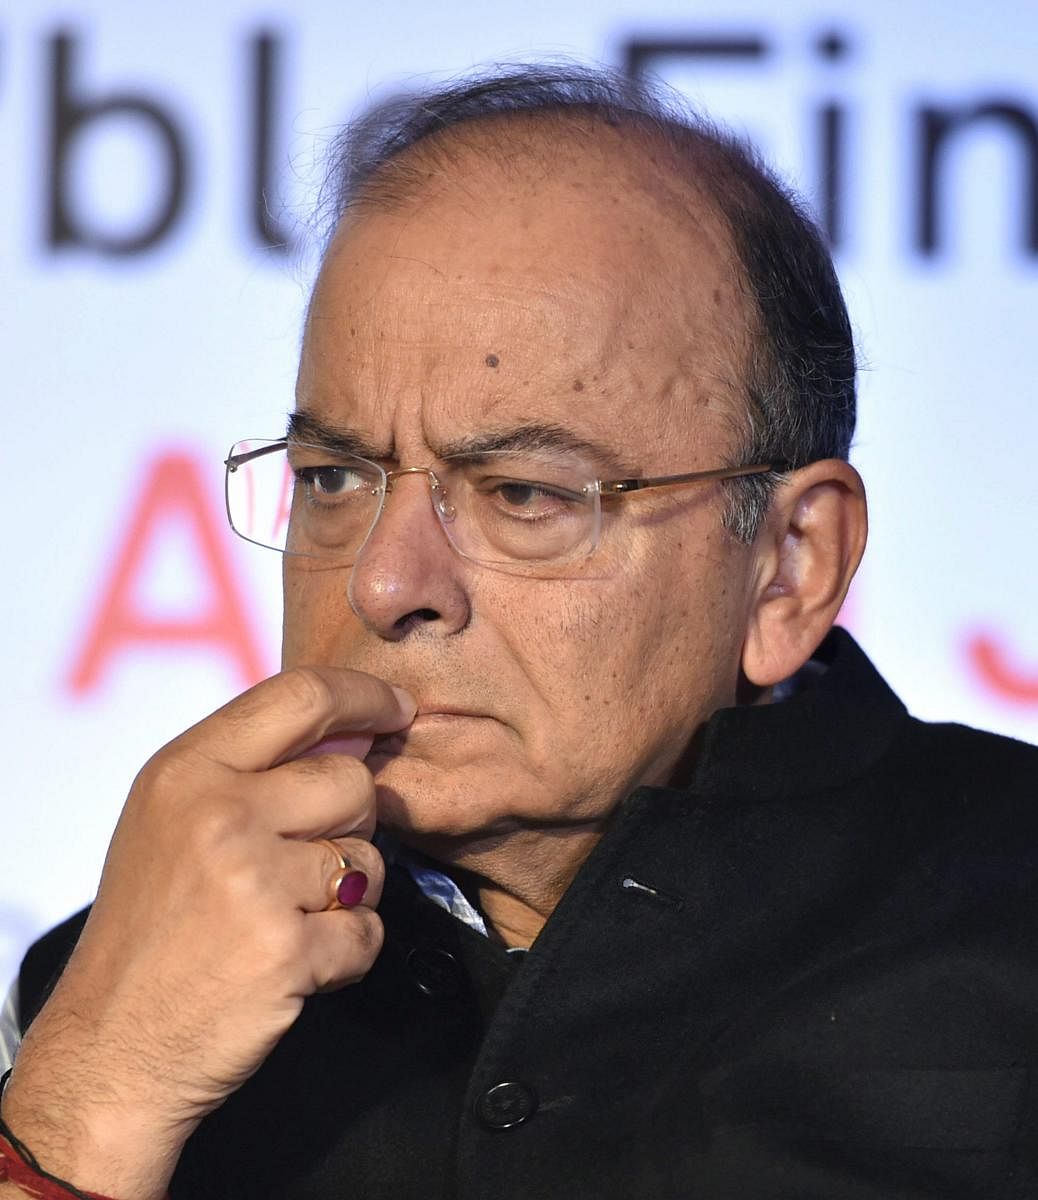 New Delhi: Union Finance Minister Arun Jaitley during the launch of CriSidEx, a sentiment index for micro, small and medium enterprises (MSME) developed by CRISIL and SIDBI in New Delhi on Saturday. PTI Photo by Vijay Verma (PTI2_3_2018_000027B)